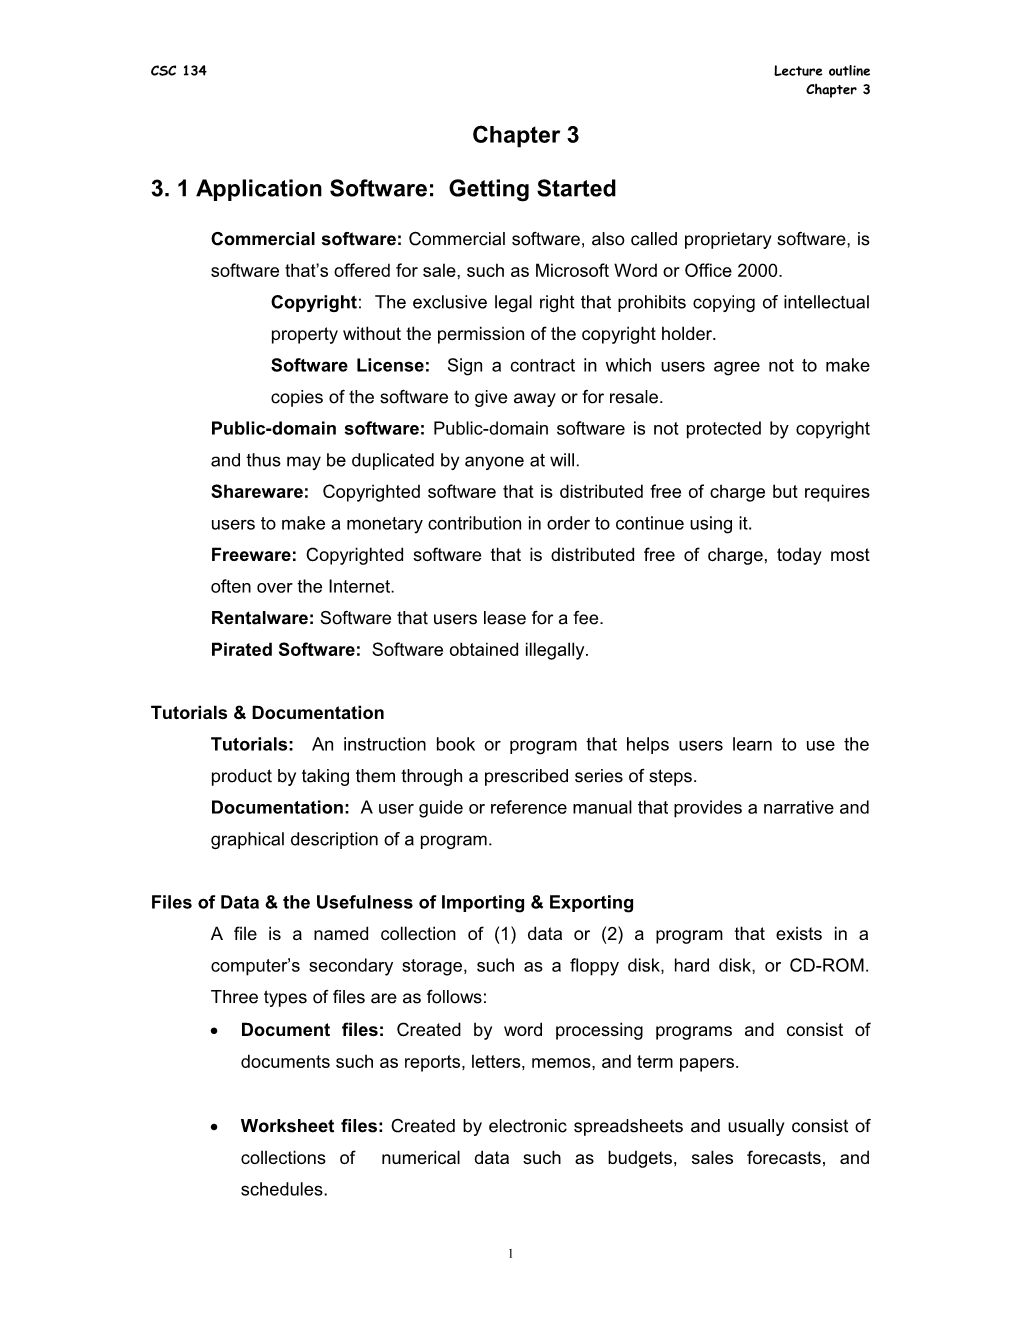 3. 1 Application Software: Getting Started